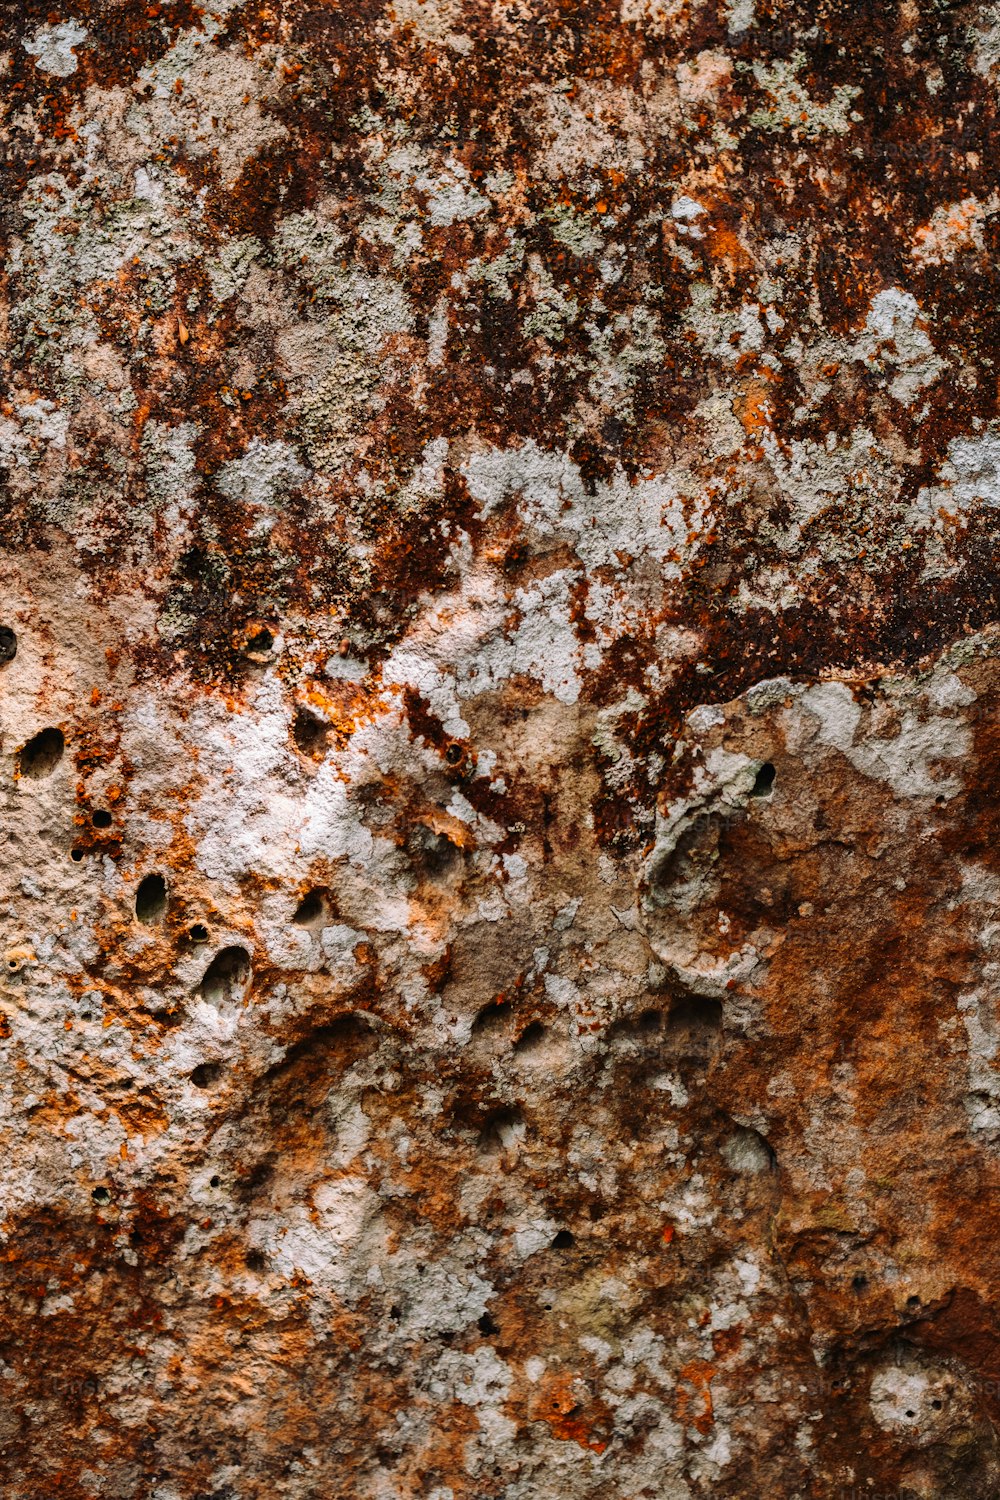 a close up of a rock with some dirt on it